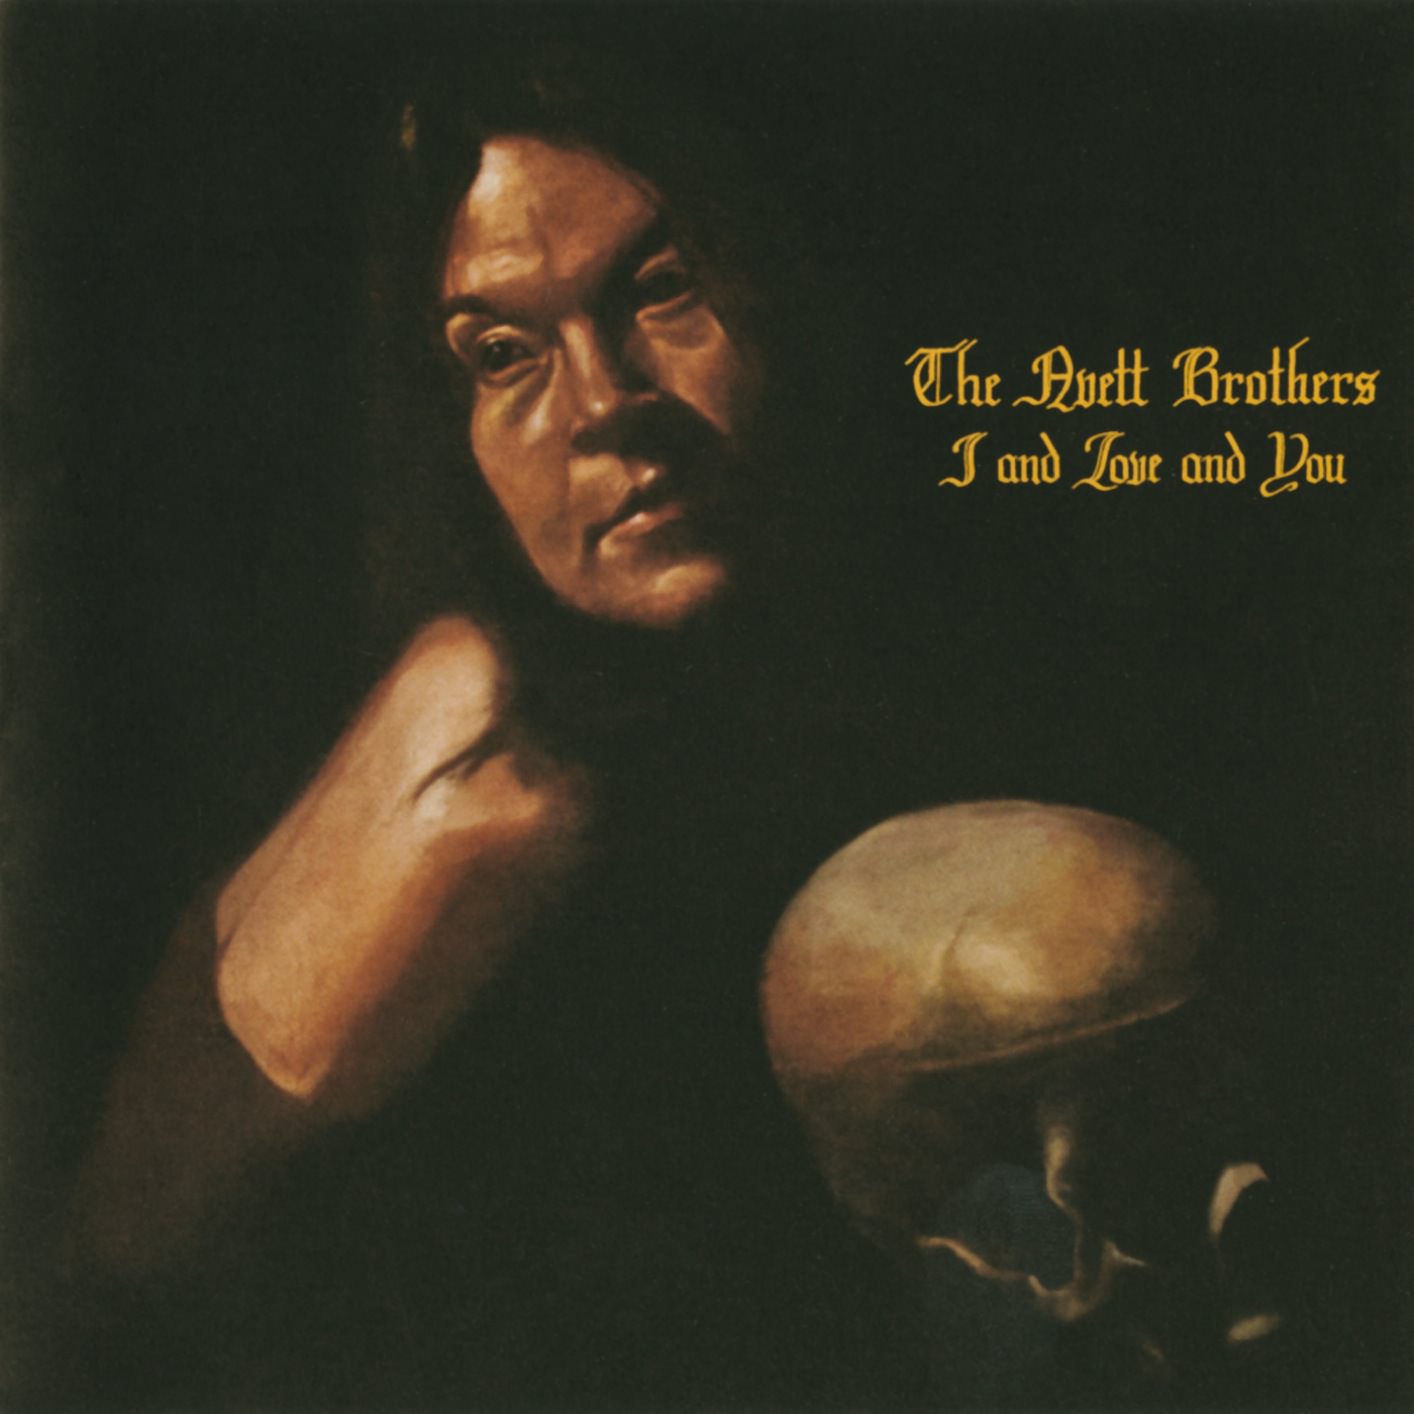 The Avett Brothers – I And Love And You (2009/2014) [Qobuz FLAC 24bit/96kHz]